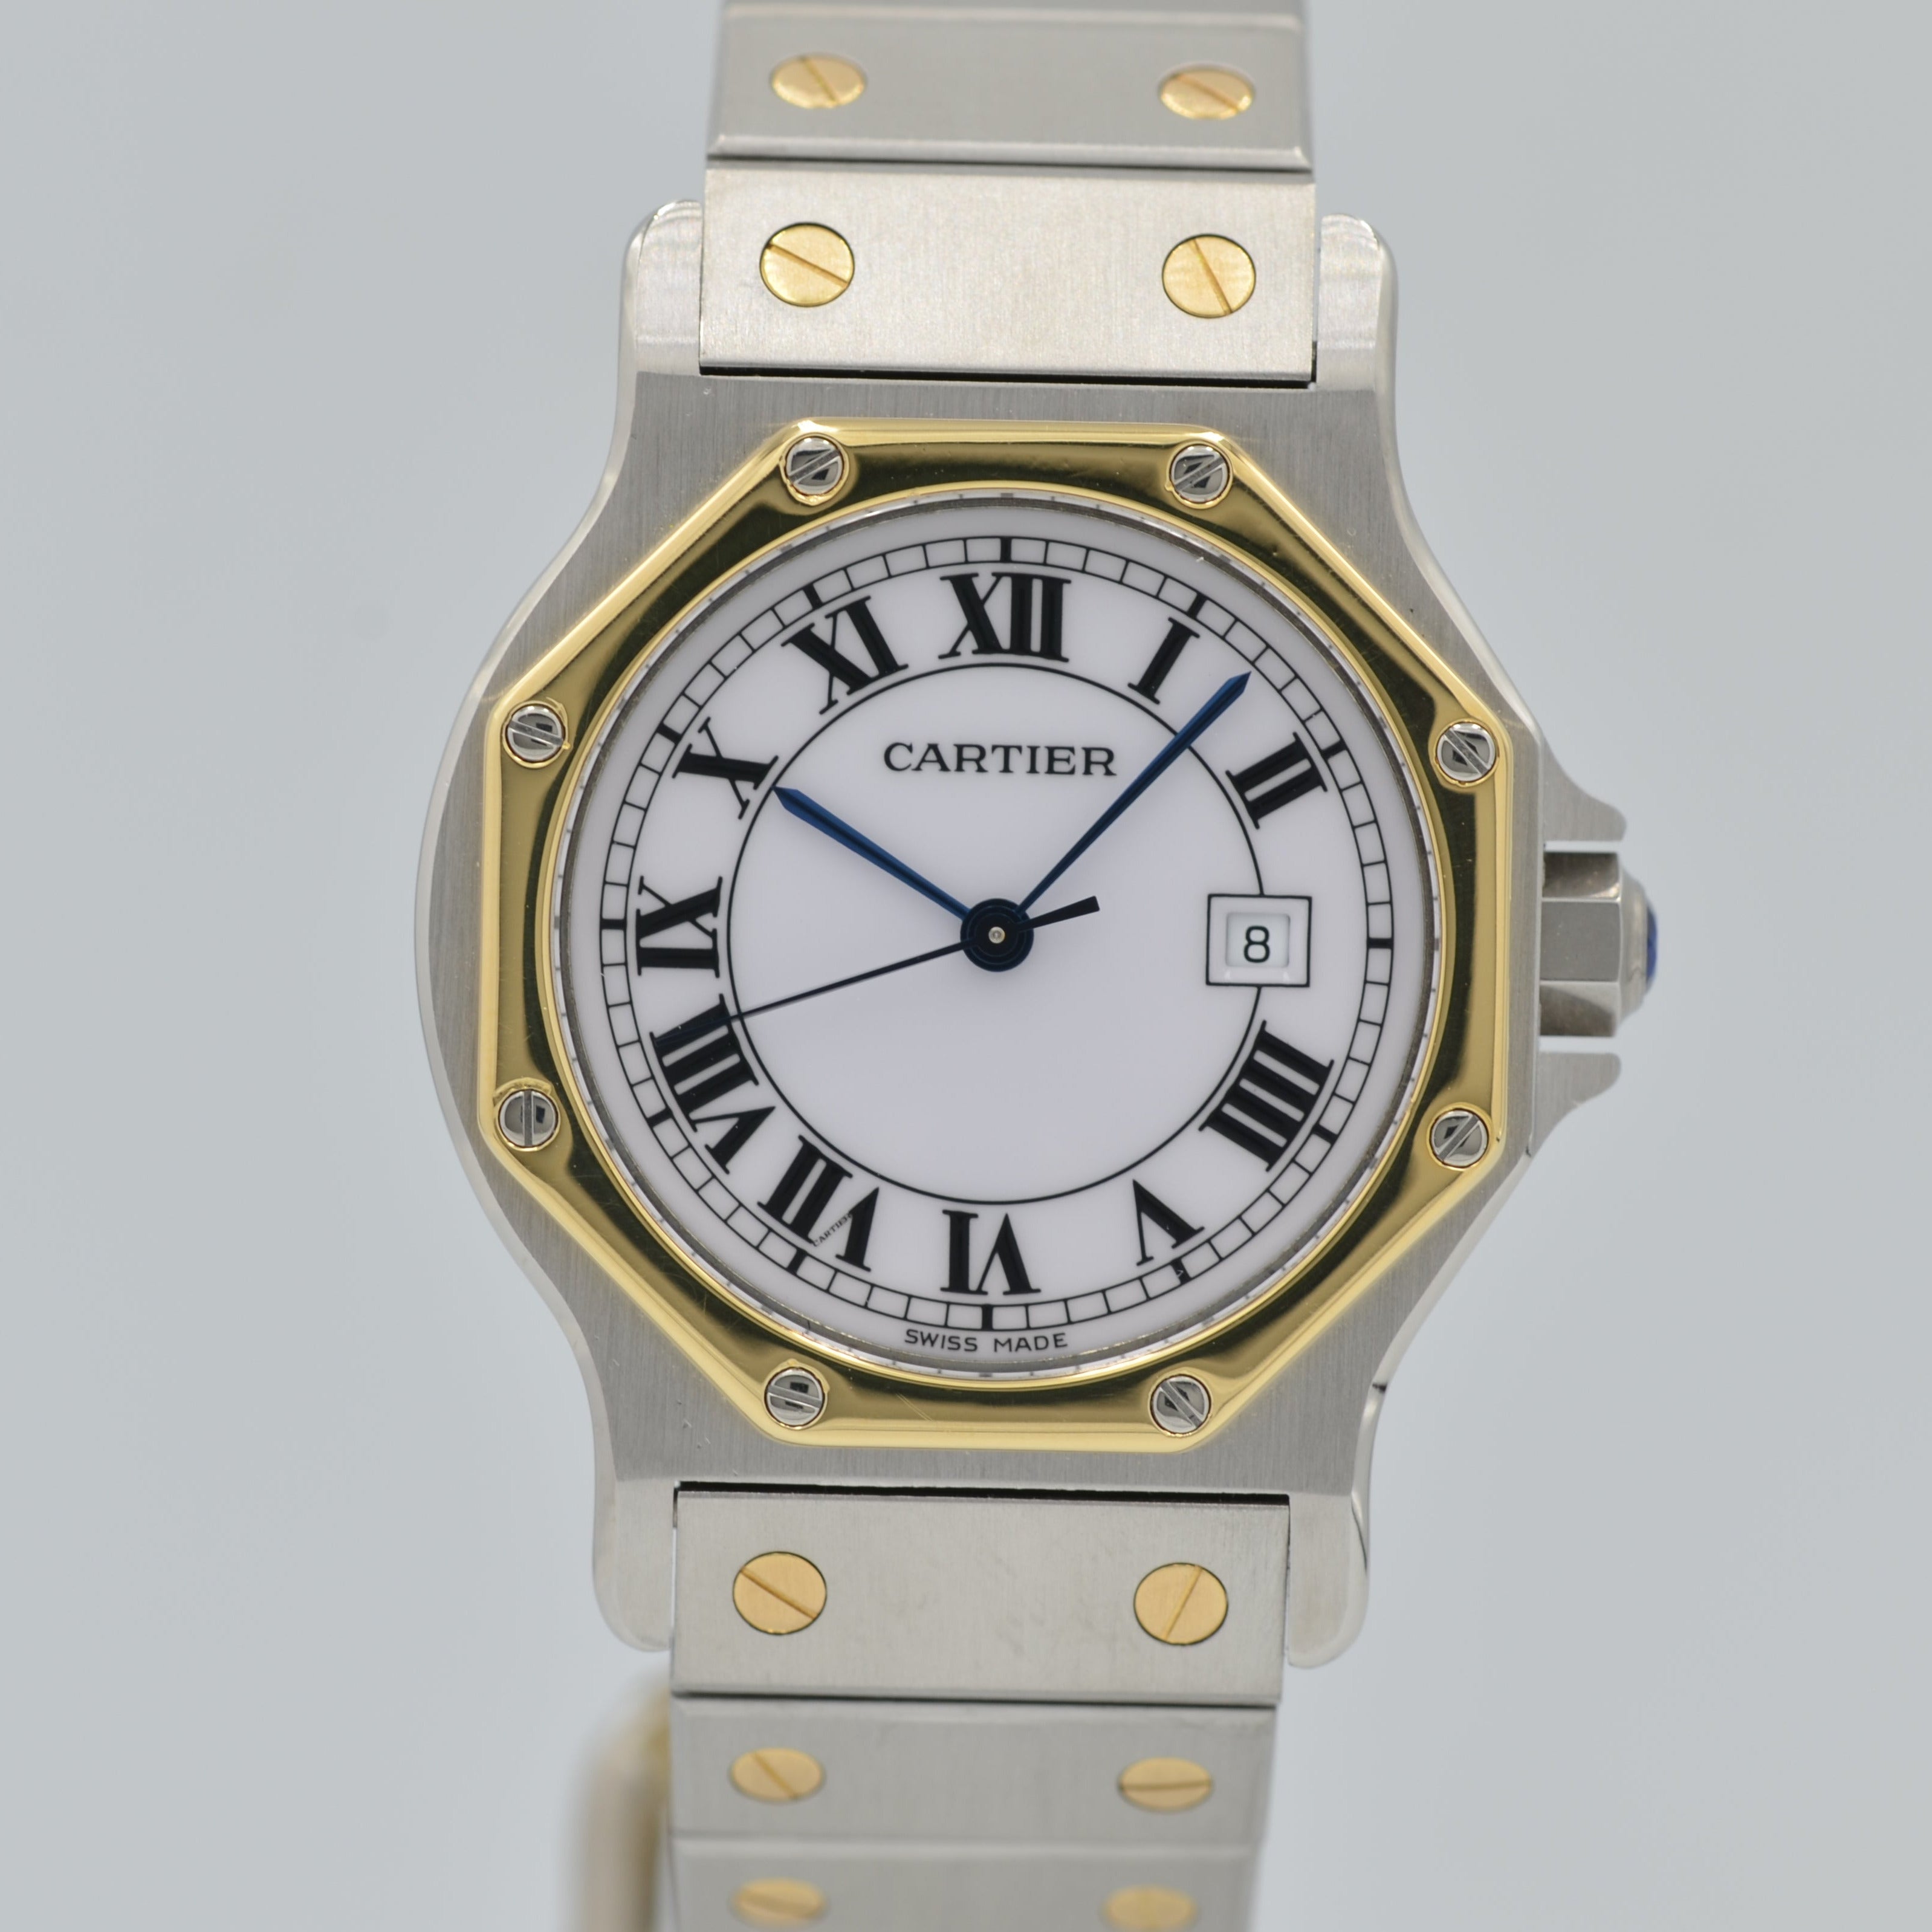 【Cartier】サントスオクタゴンLMコンビ自動巻き 付属品付き